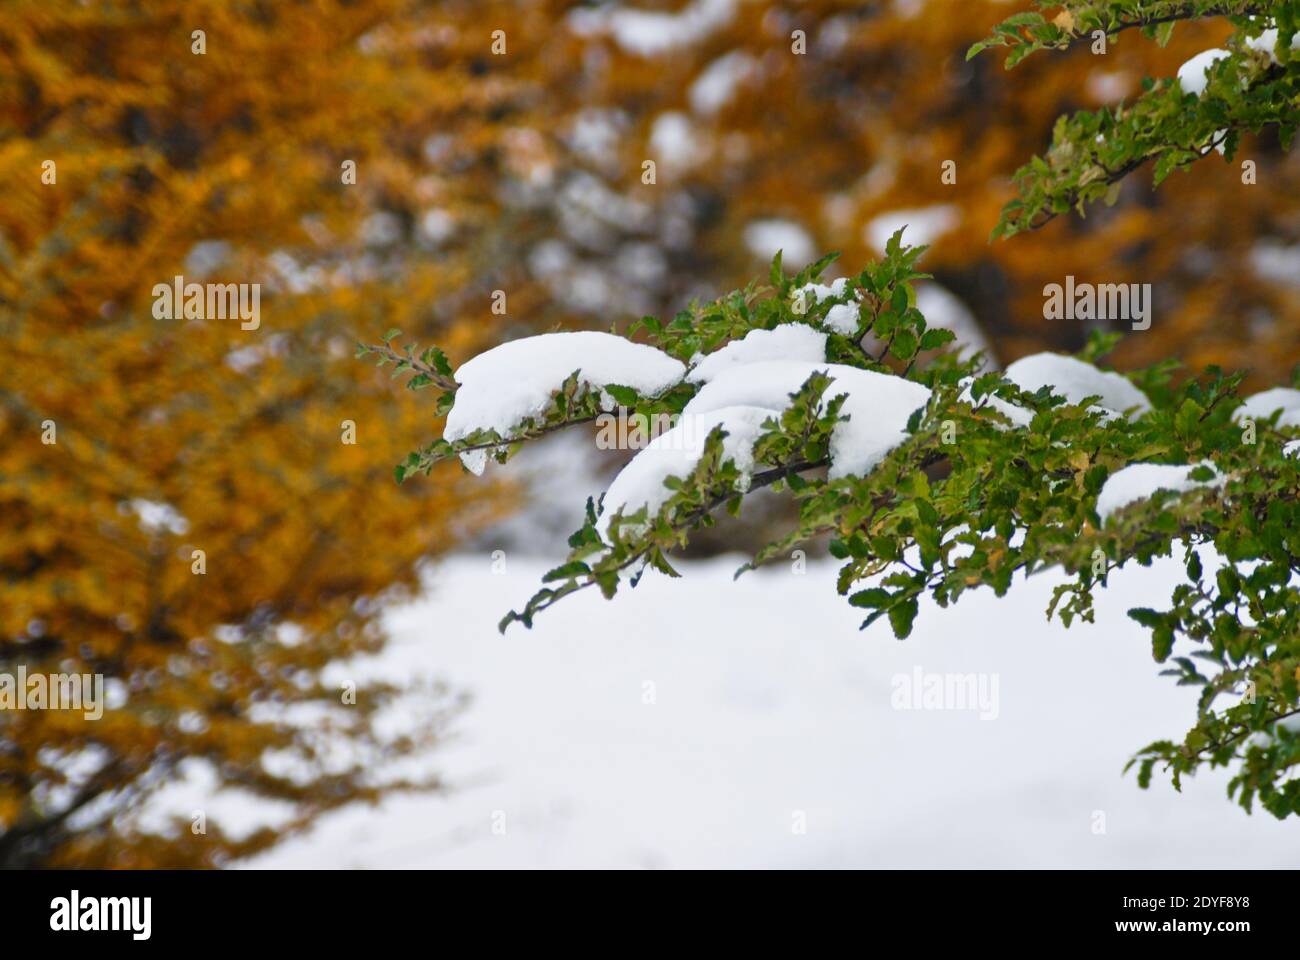 Coloured autumn trees covered by snow. Ushuaia. Tierra del Fuego, Argentina Stock Photo